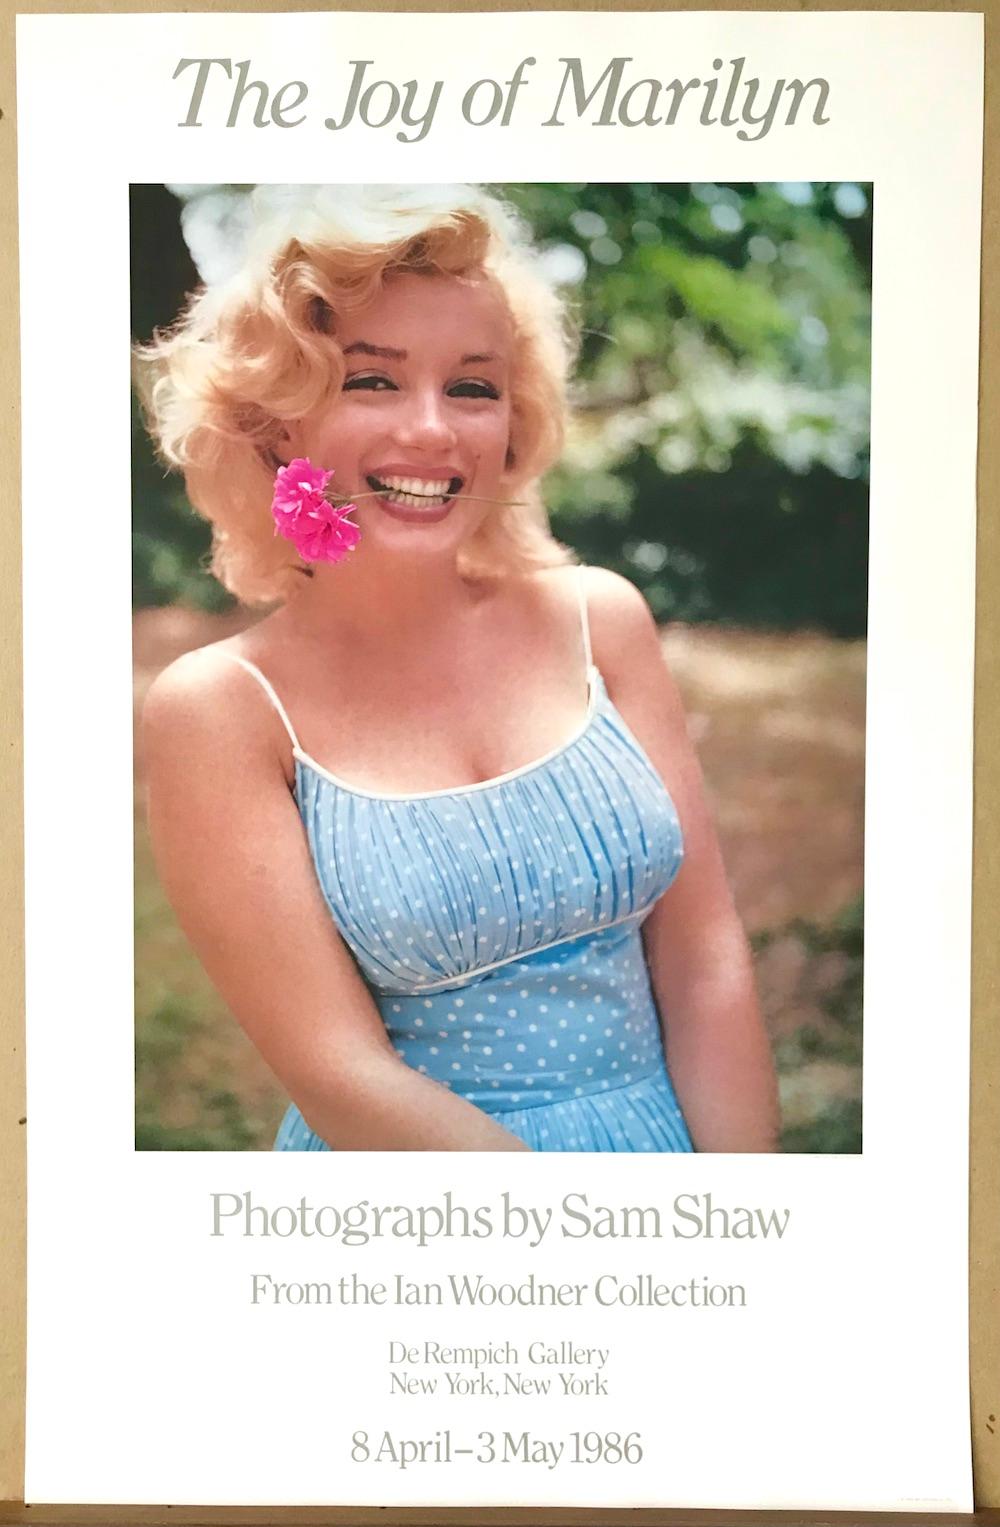 Sam Shaw THE JOY OF MARILYN 1986 Exhibition Poster, Marilyn Monroe, Summer Dress For Sale 3